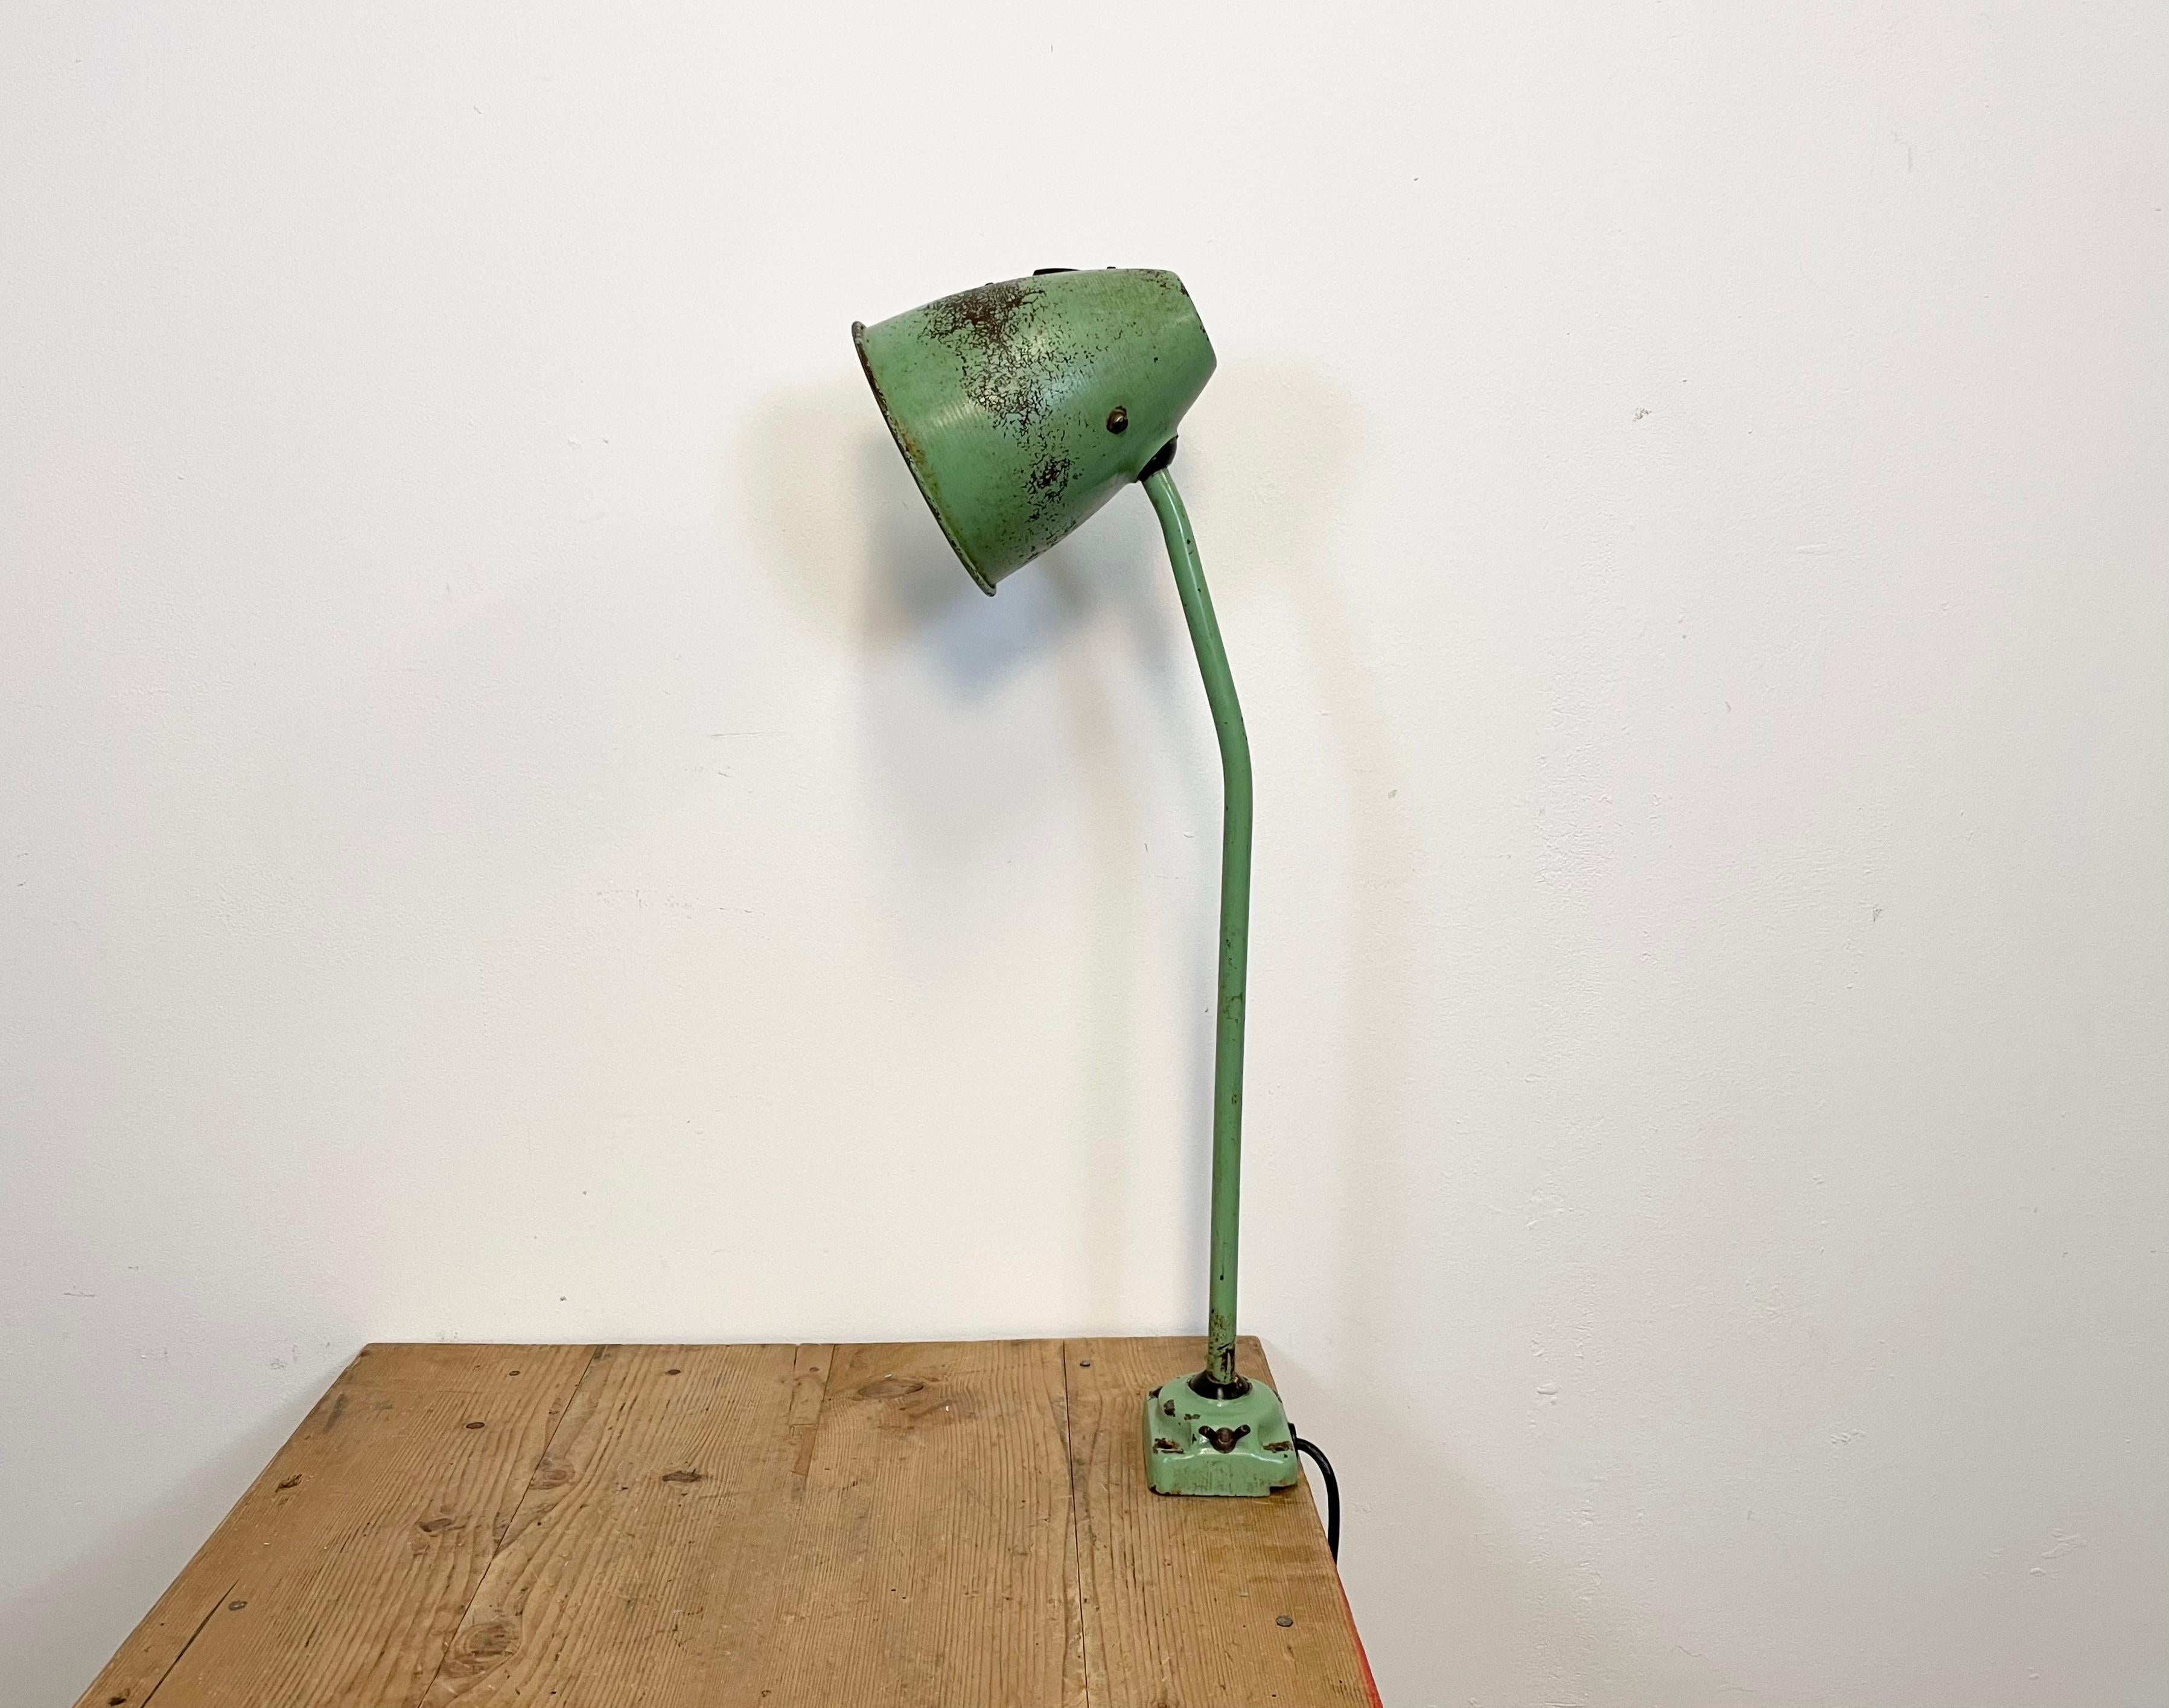 Green industrial adjustable workshop  table lamp was made in former Czechoslovakia during the 1960s. It features an iron shade ,base and arm with two adjustable joints. The porcelain socket requires standard E 27/ E26 light bulbs.New wire. The